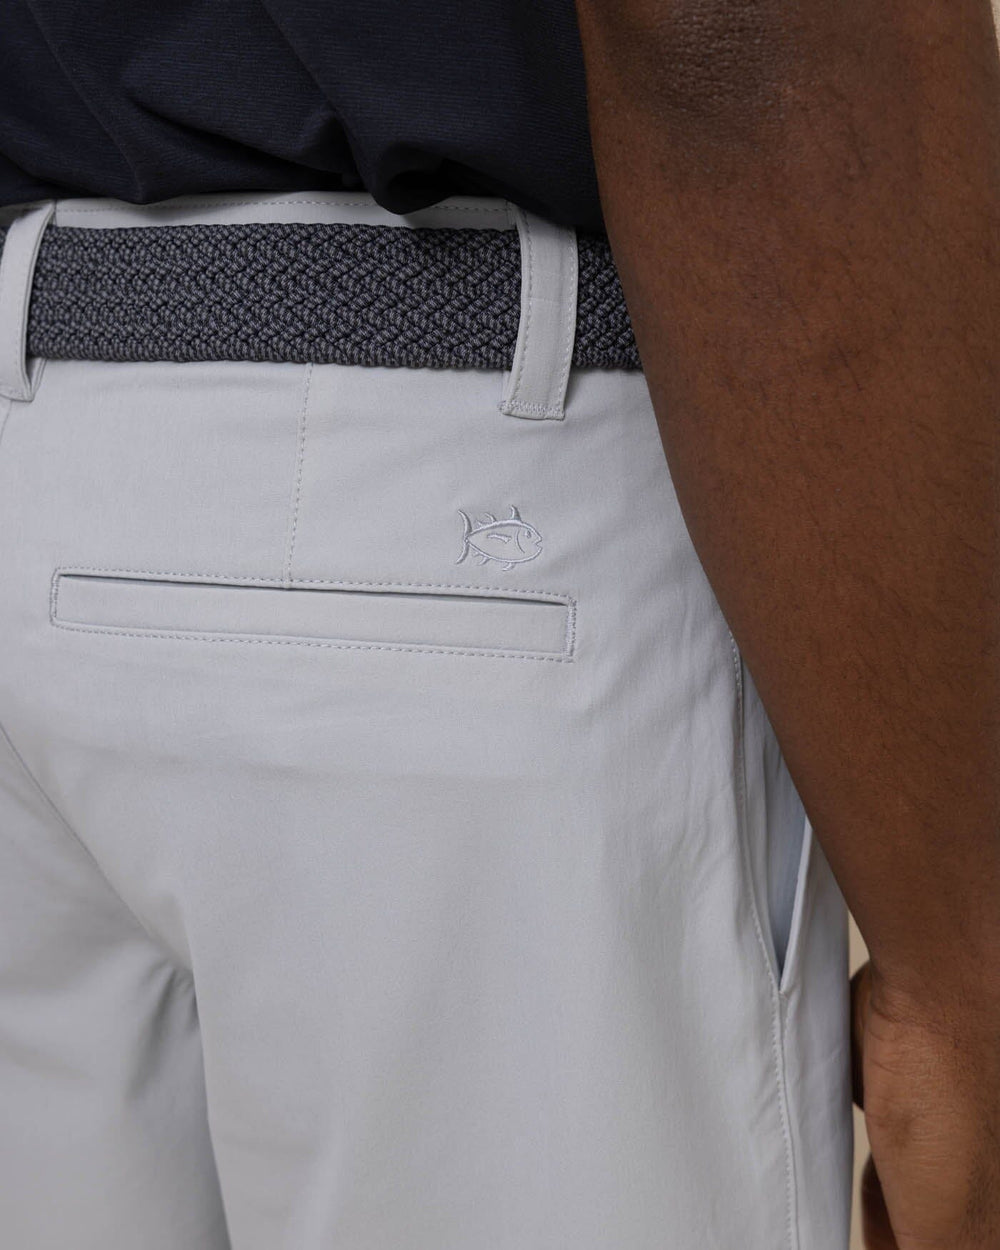 The detail view of the Southern Tide brrr die 10 Short by Southern Tide - Seagull Grey